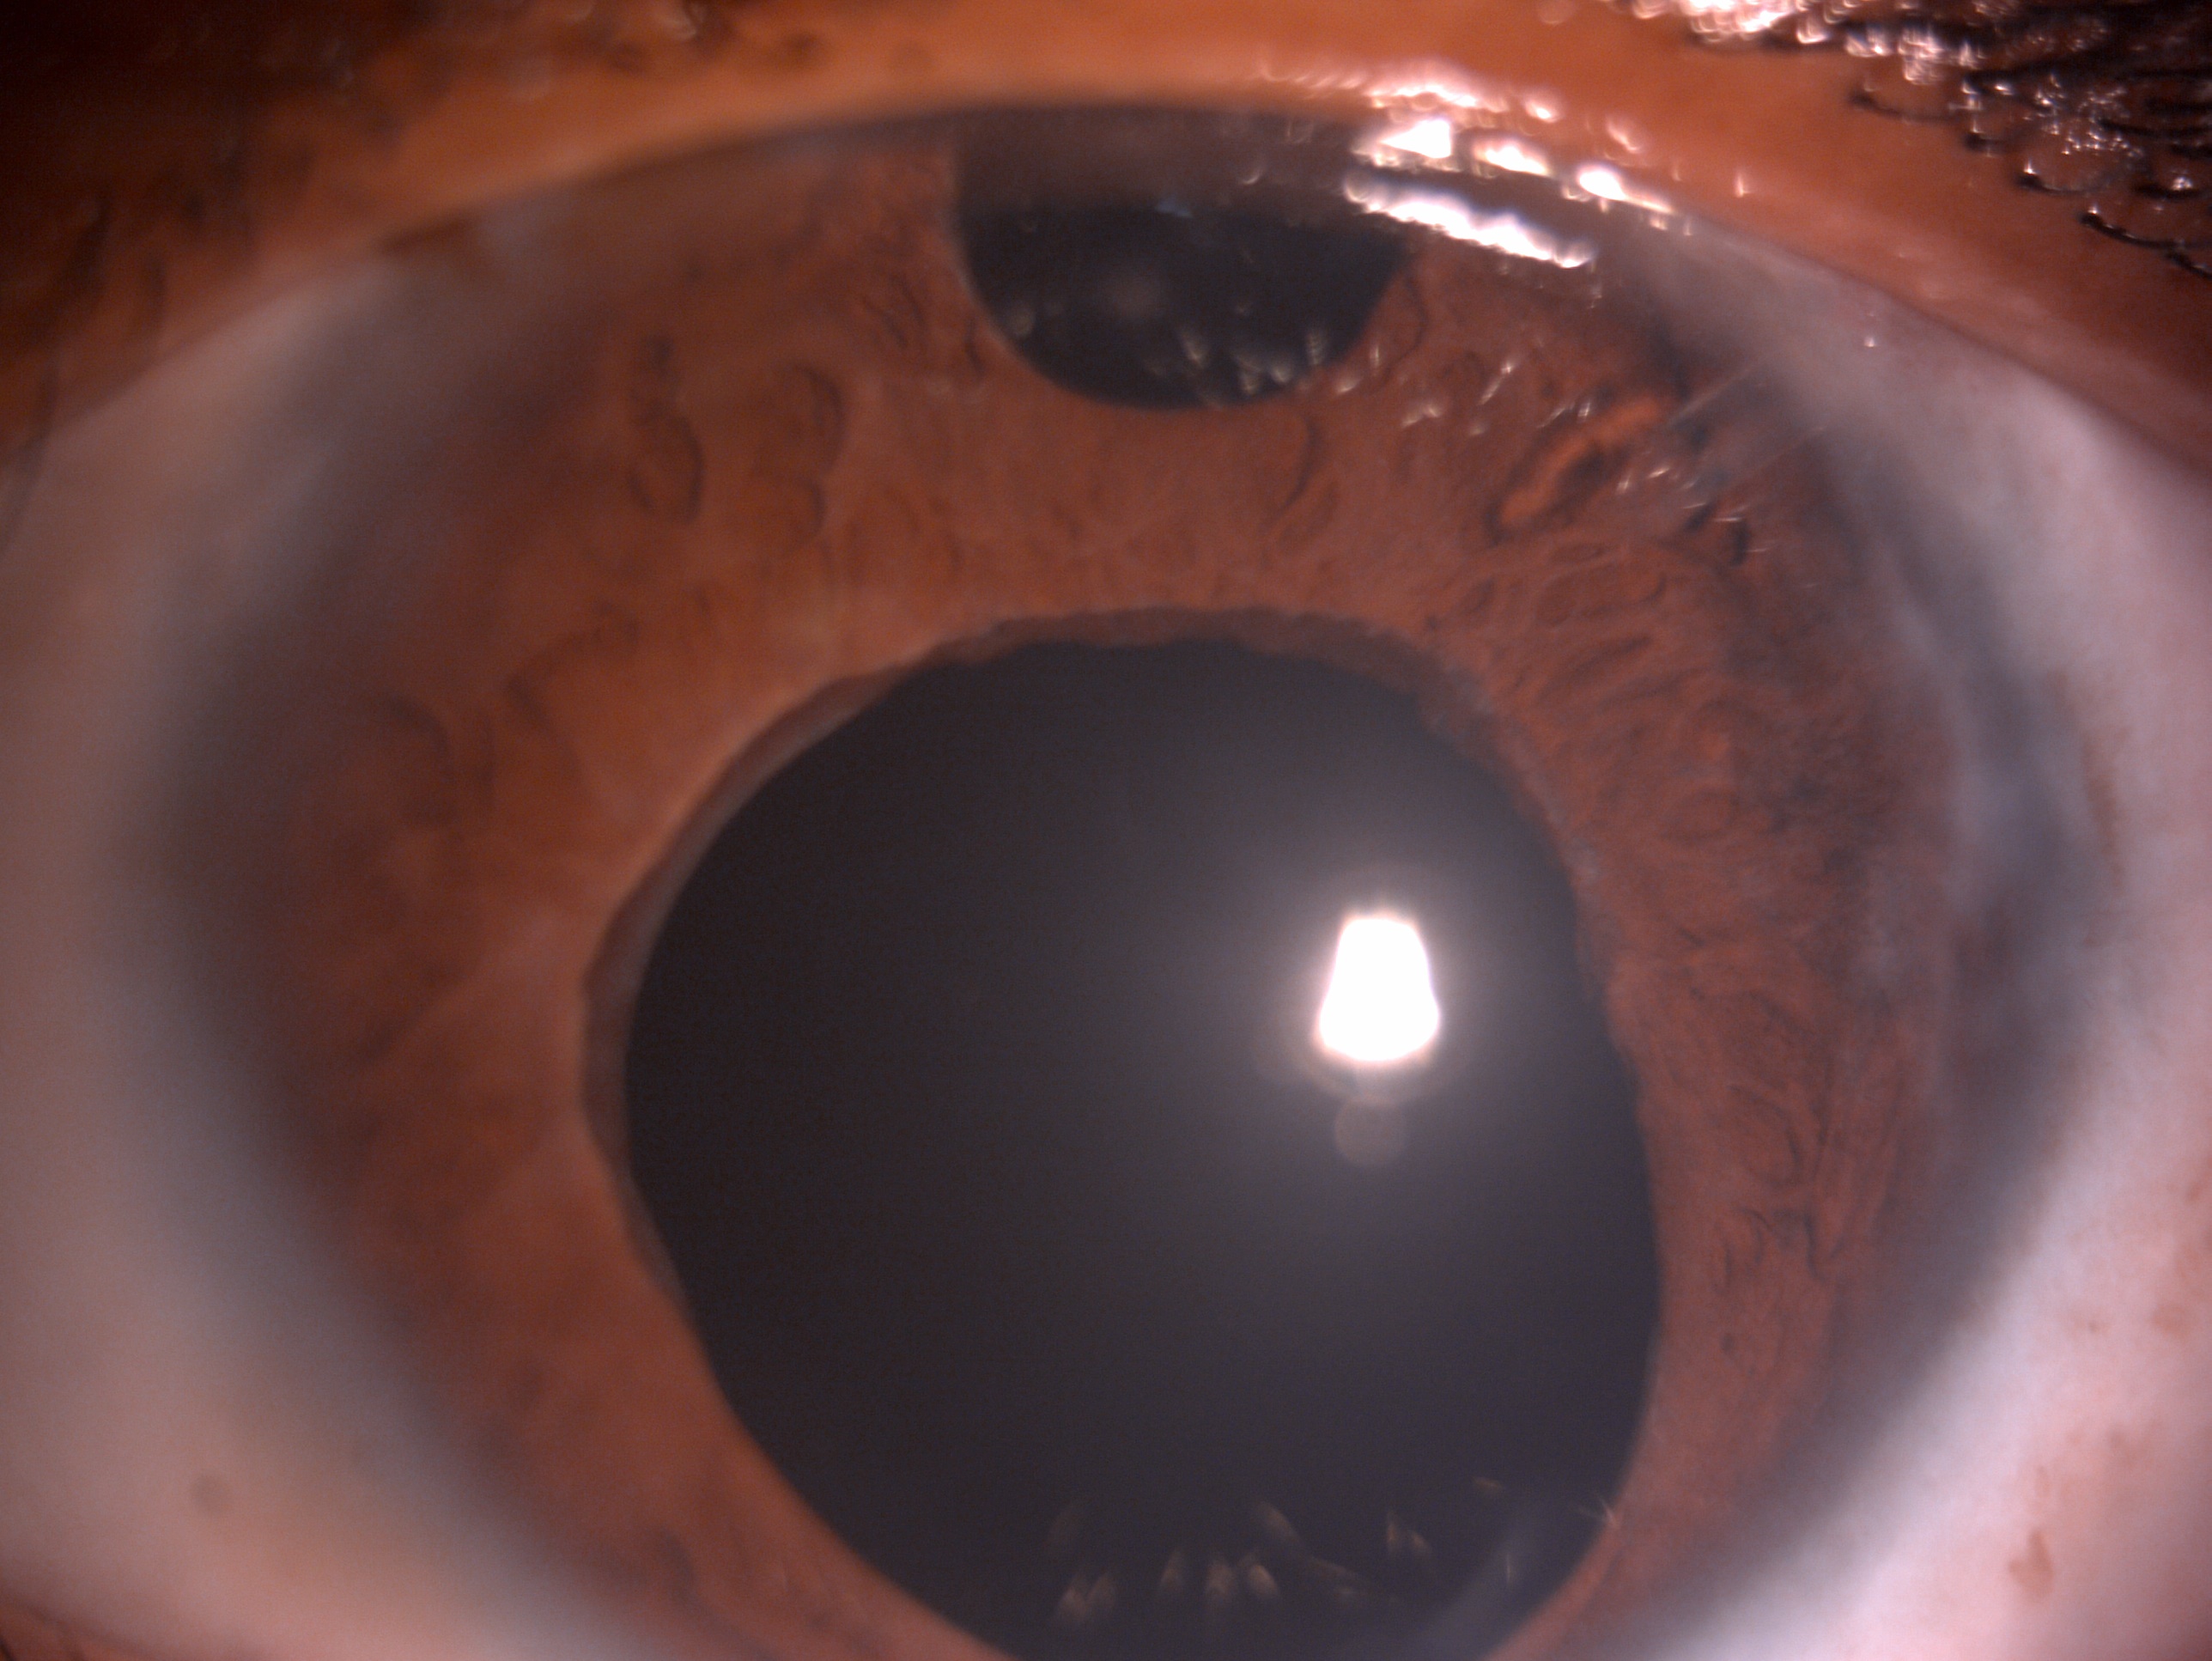 Slit lamp image of the child depicting megalocornea, tube shunt in the anterior chamber, surgical peripheral iridectomy, dilated ischemic pupil and aphakia post glaucoma drainage device for recalcitrant primary congenital glaucoma refractory to angle and filtration surgery